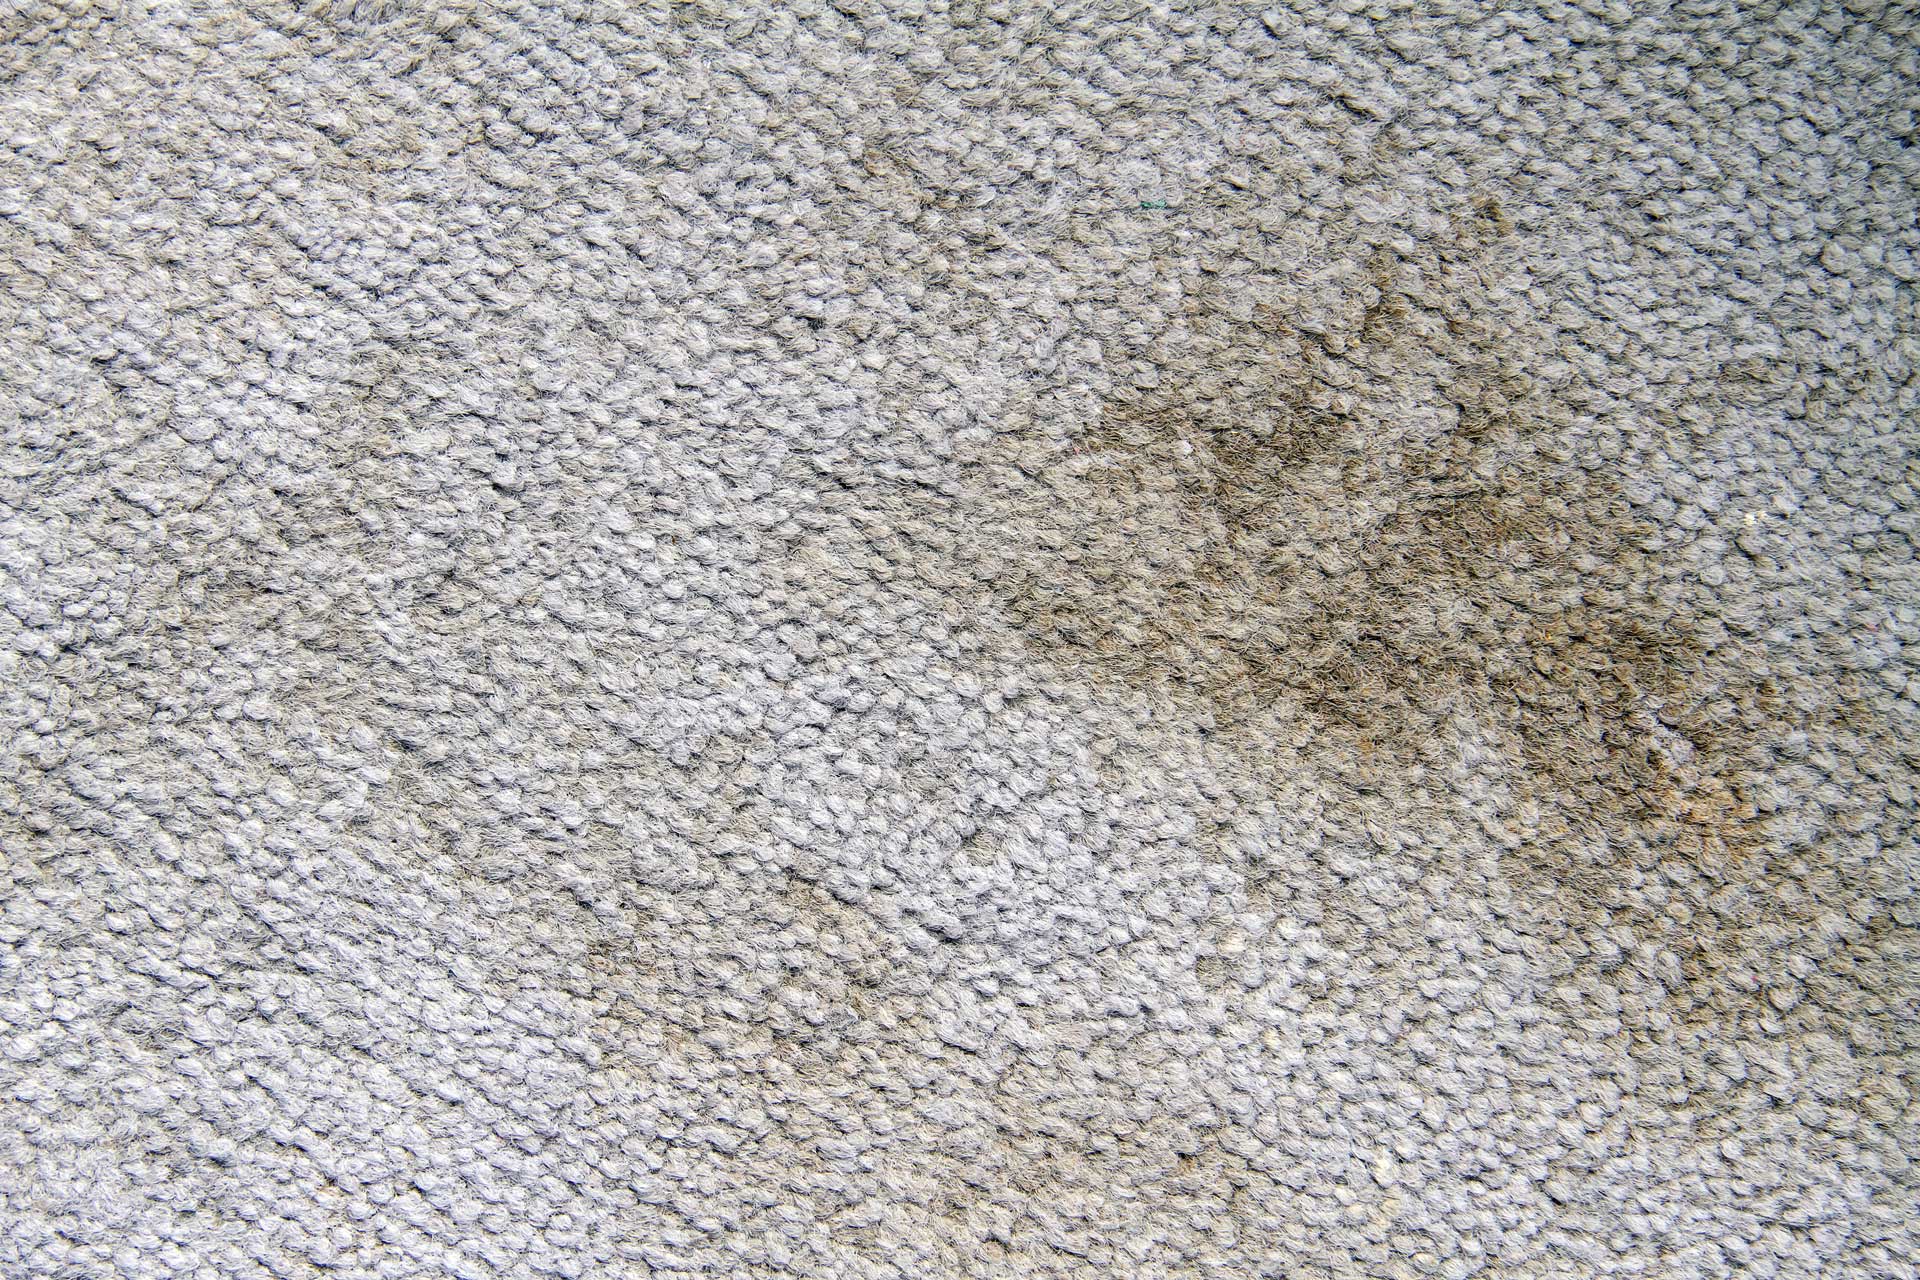 image of cleaning mildew from carpets with carpet keepers